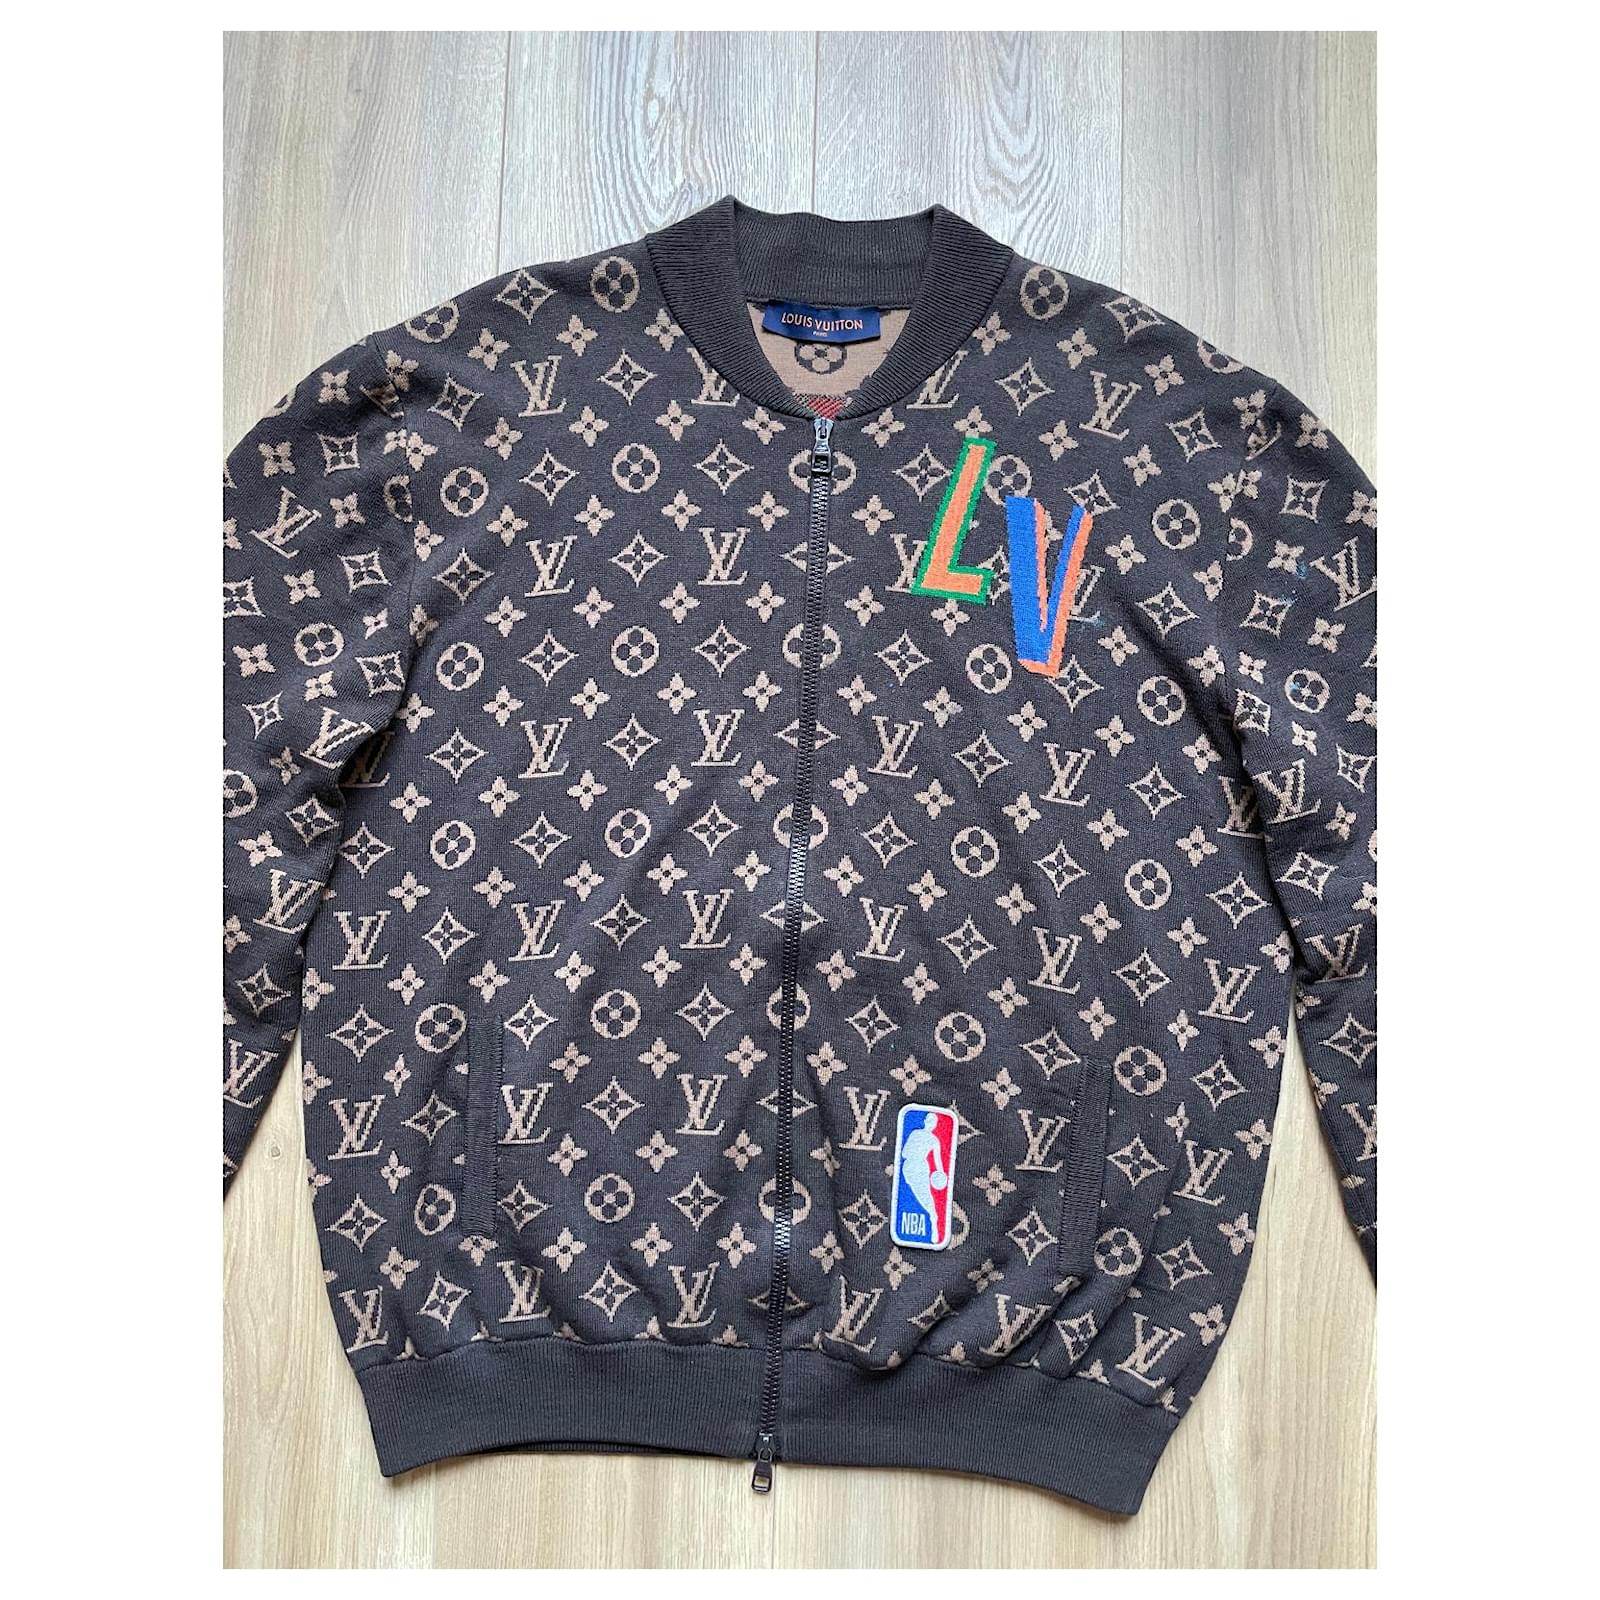 louis vuitton jacket price in south africa